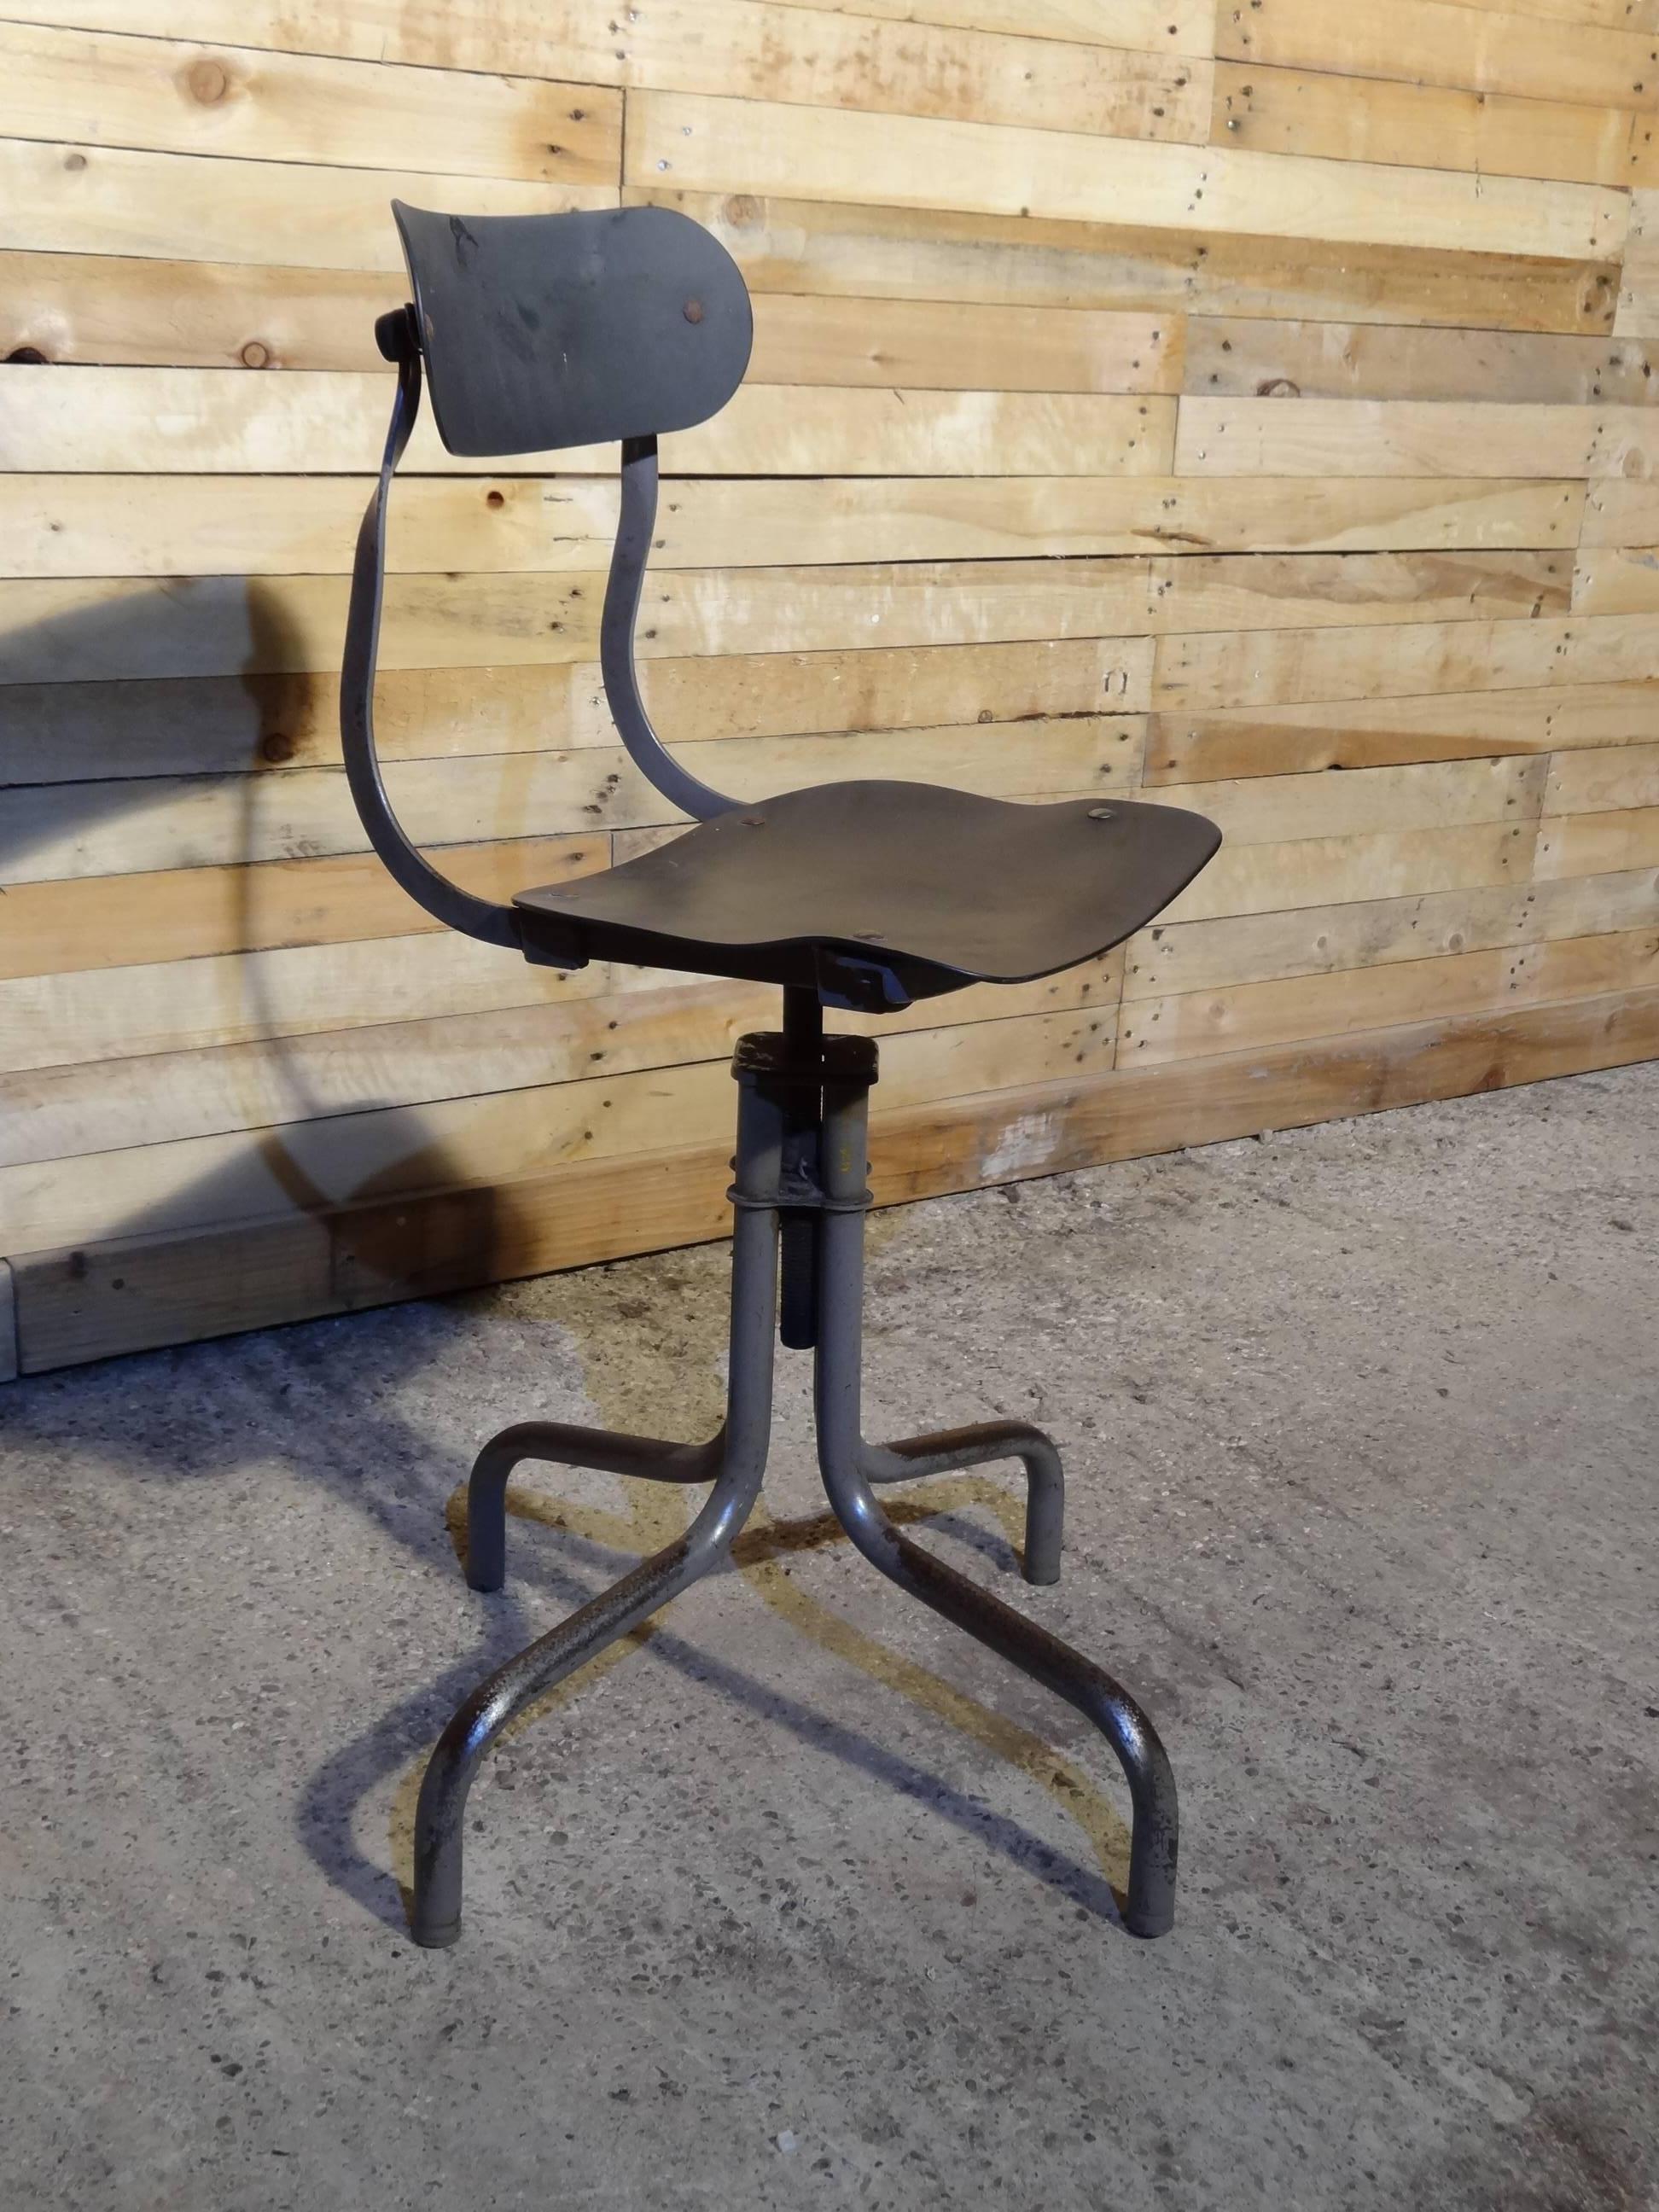 Tan-Sad Chair Co. 1930s Industrial Metal Height Adjustable Sewing Stool In Good Condition For Sale In Markington, GB